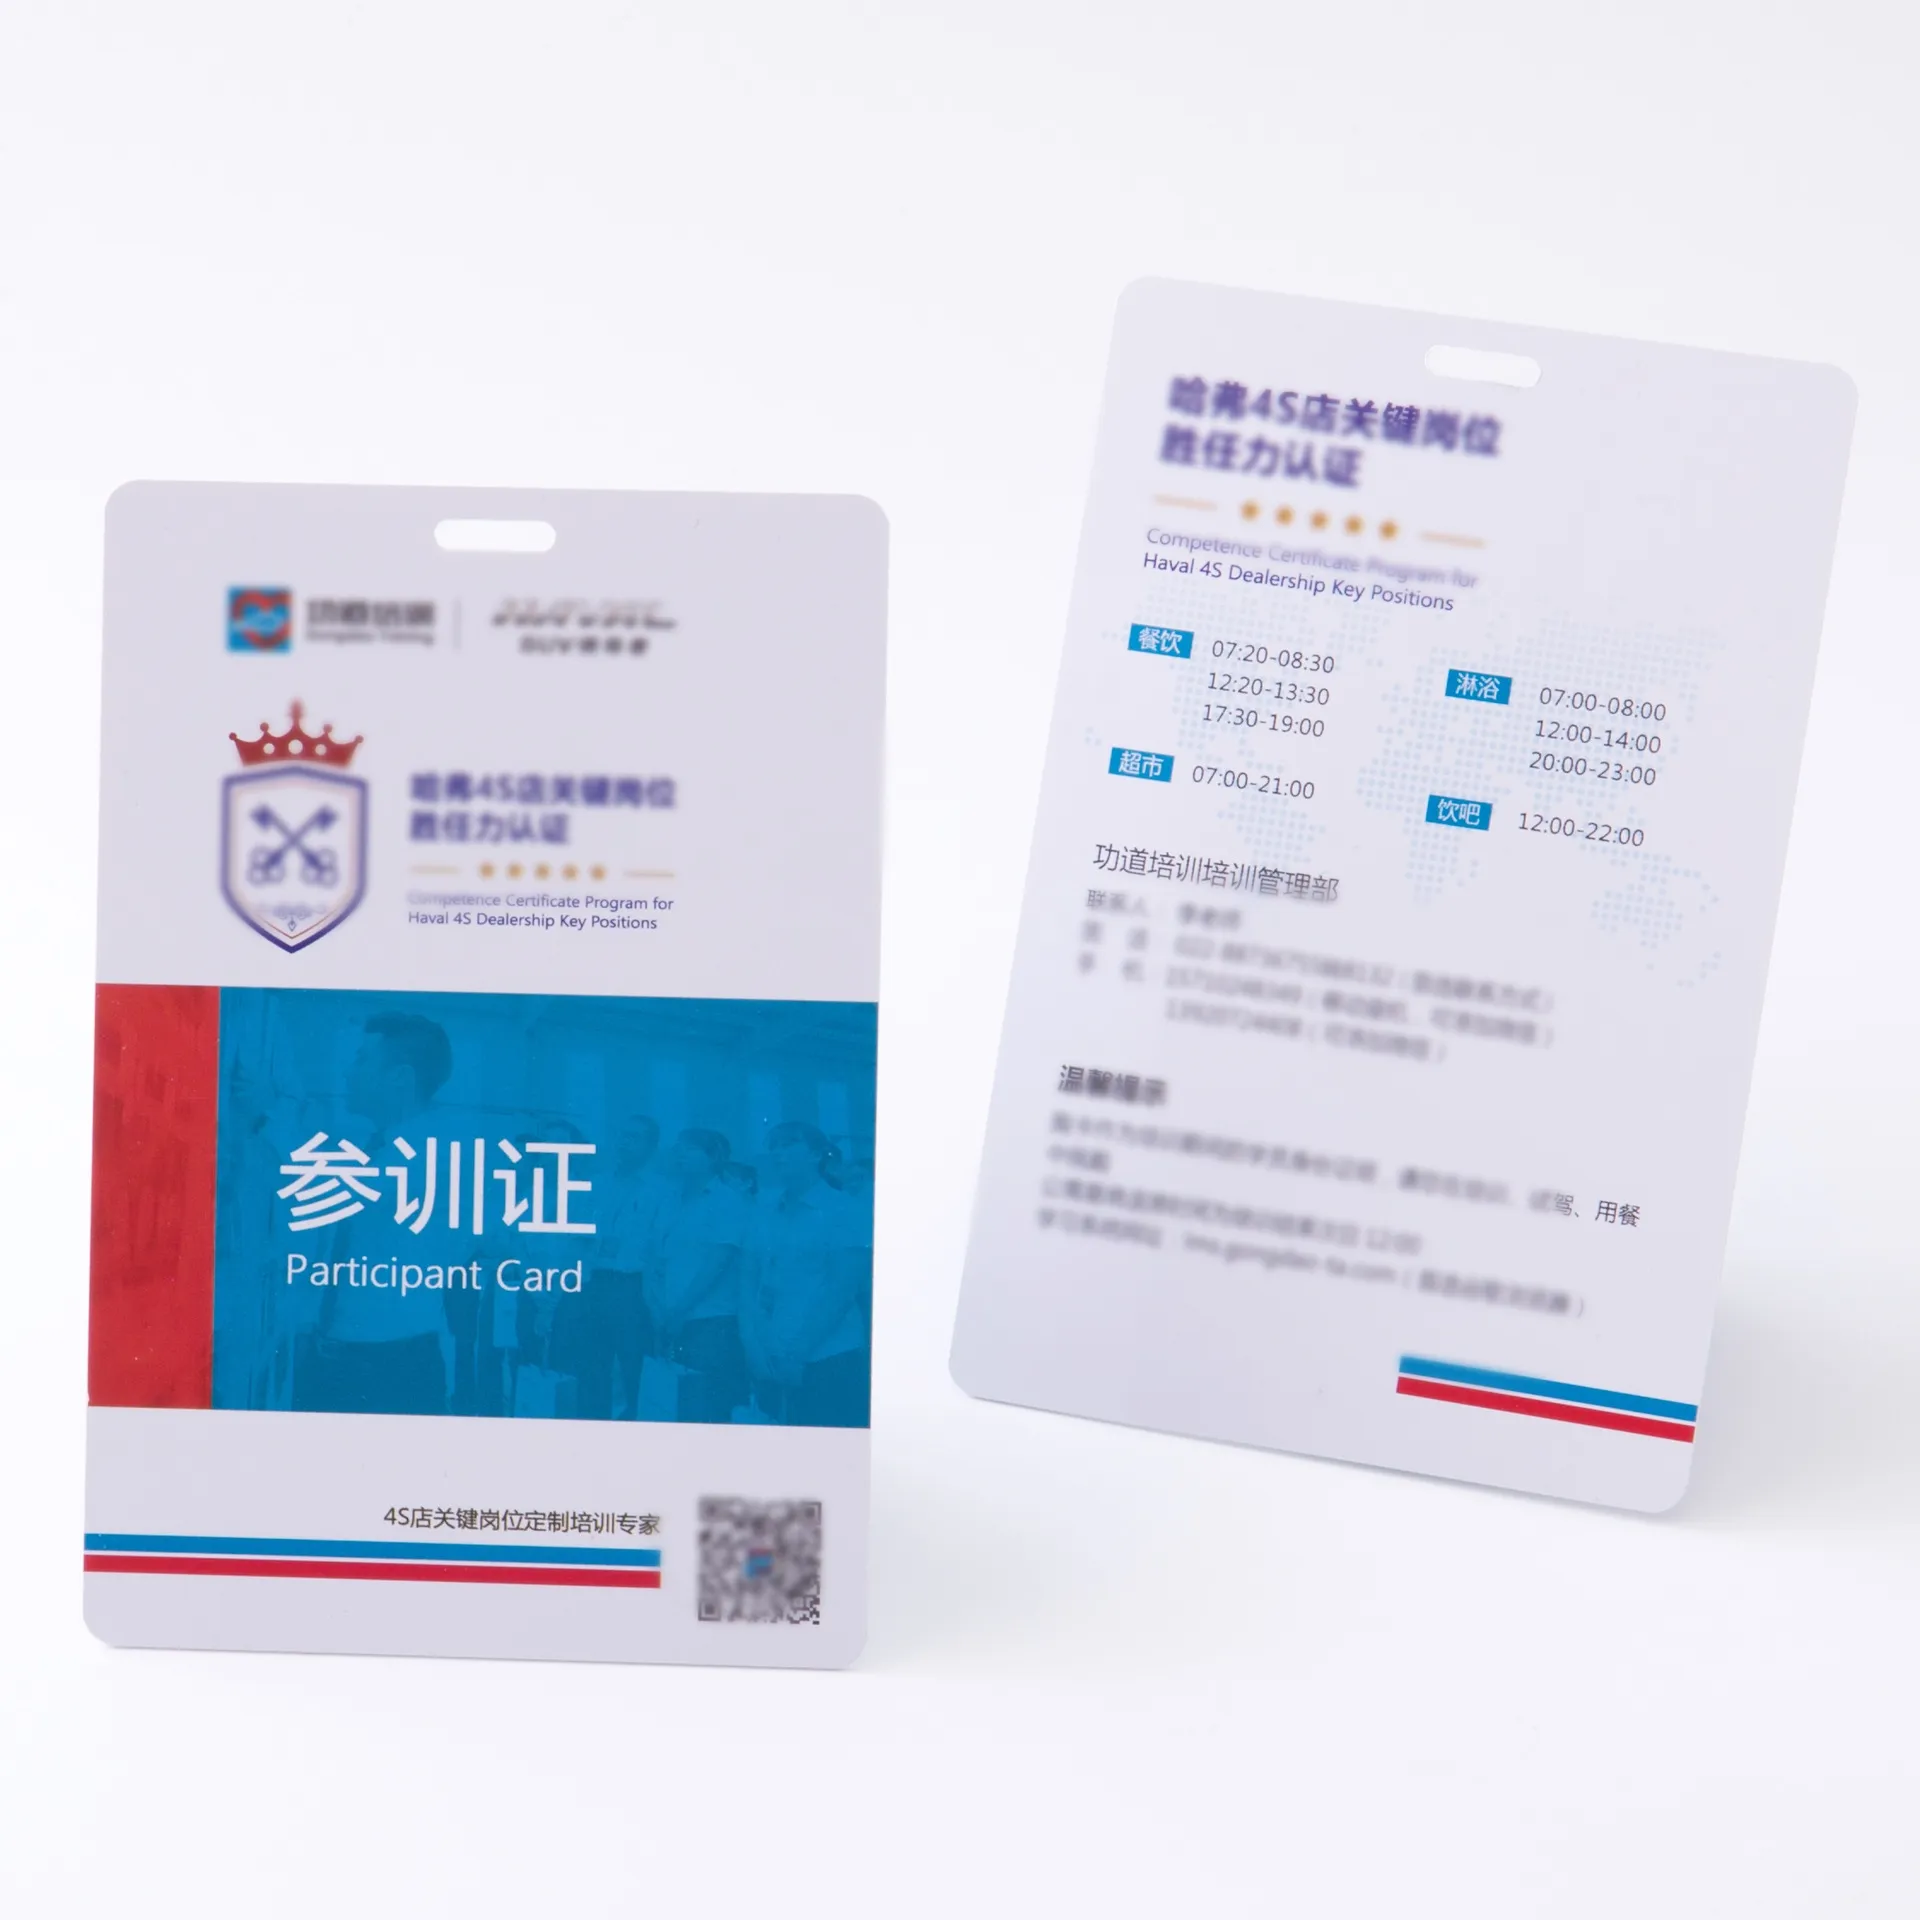 Custom printable pvc id card 125khz punch slot hole rfid pvc card qr printed with hologram stamped for business name card